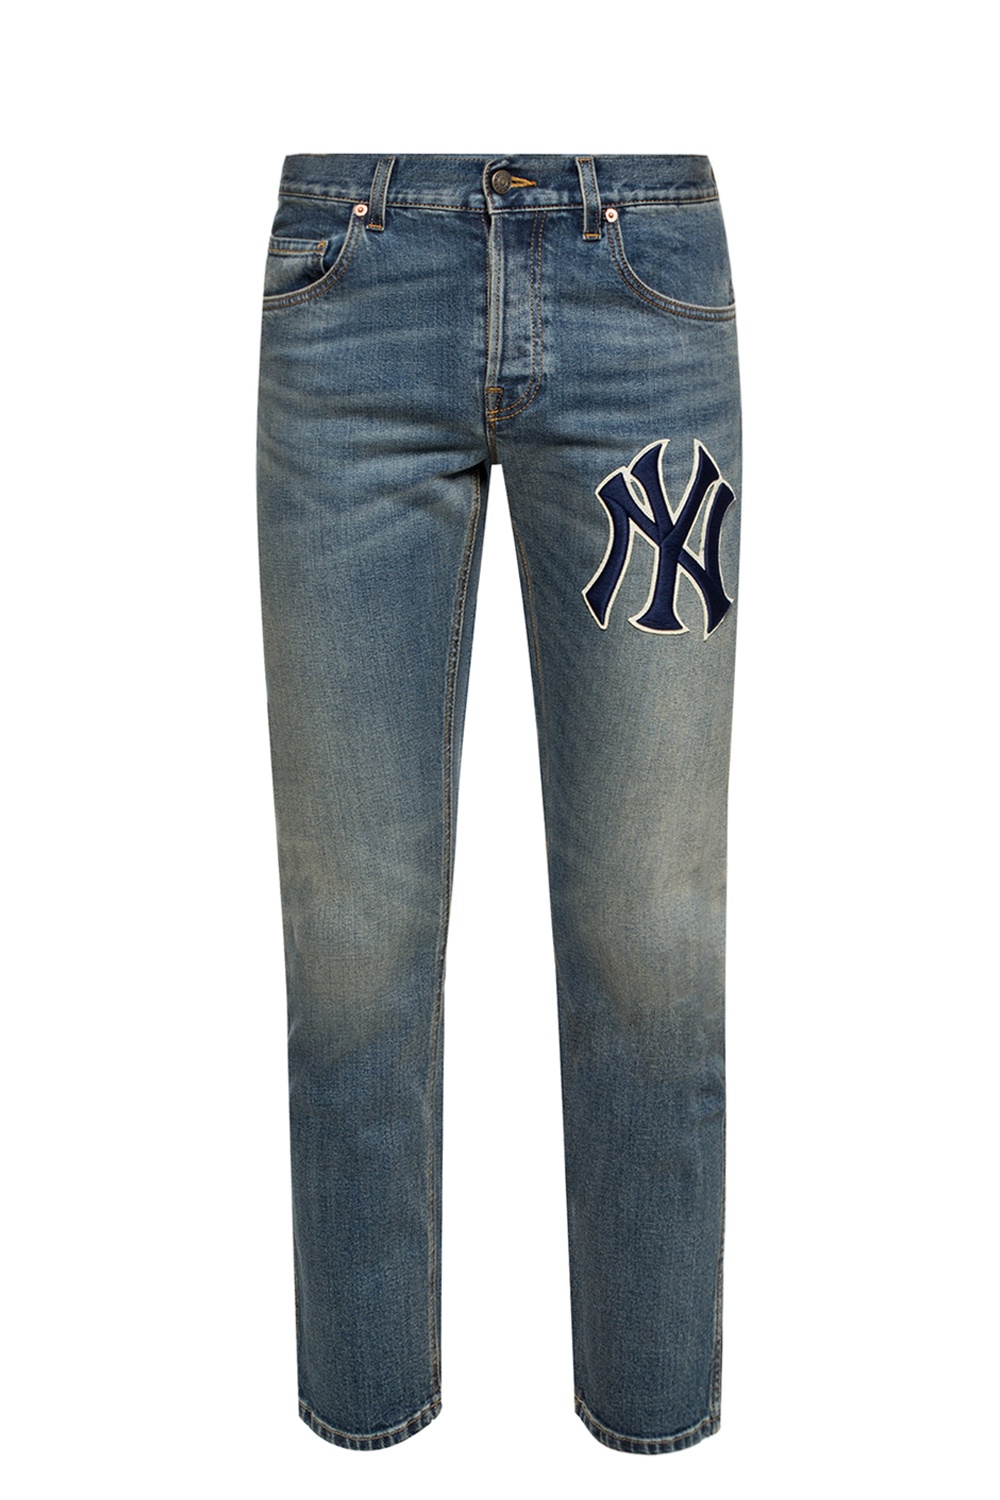 gucci yankees jeans